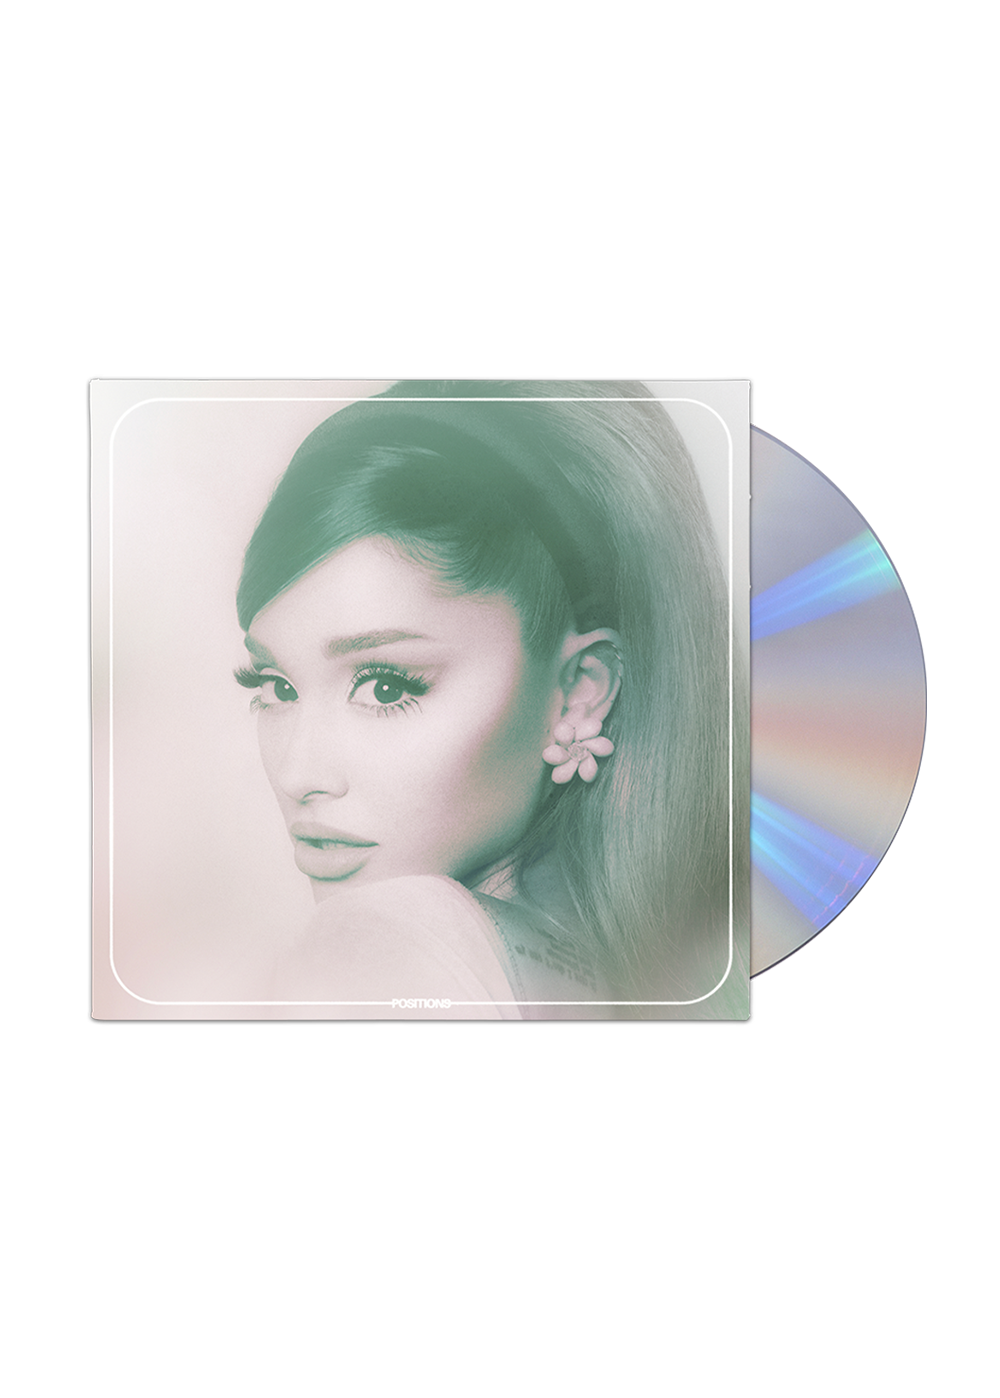 Positions Limited Edition CD 1 – Ariana Grande